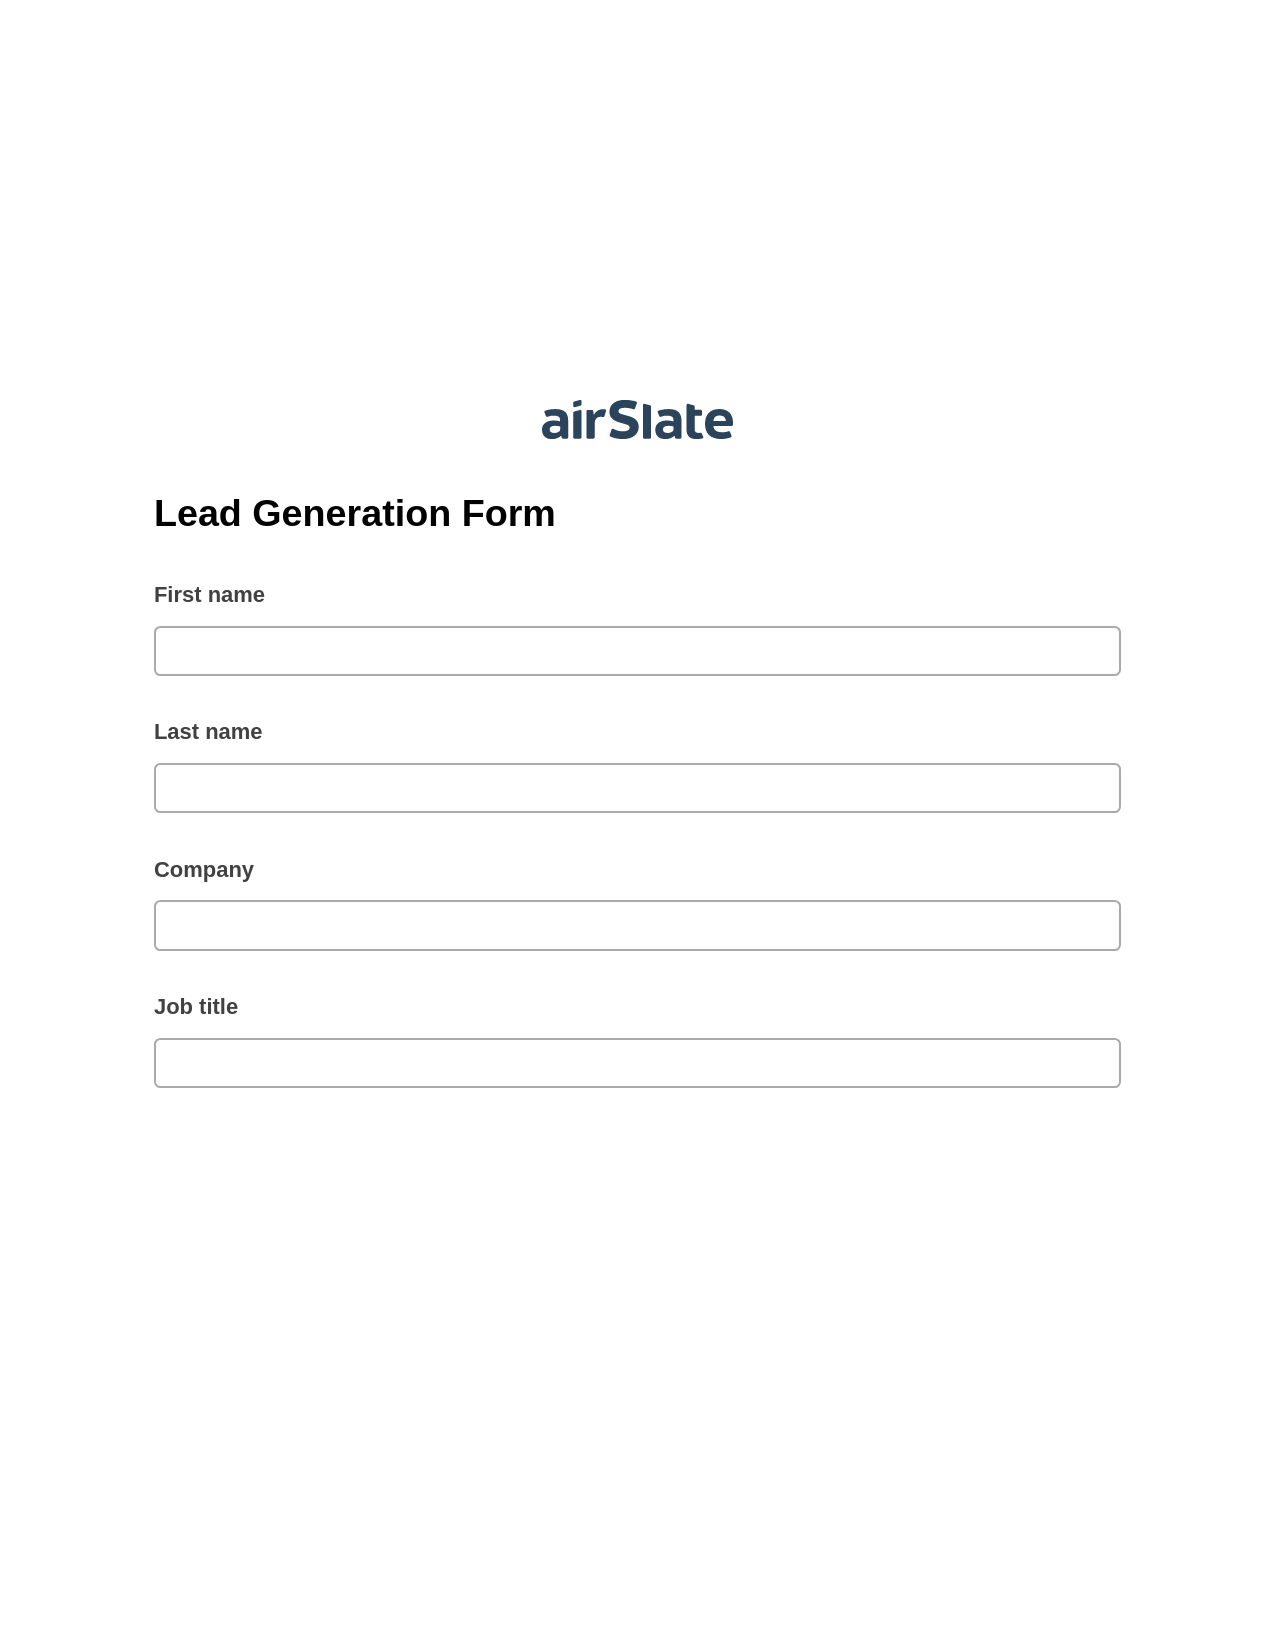 Lead Generation Form Pre-fill Document Bot, Remove Tags From Slate Bot, Archive to OneDrive Bot